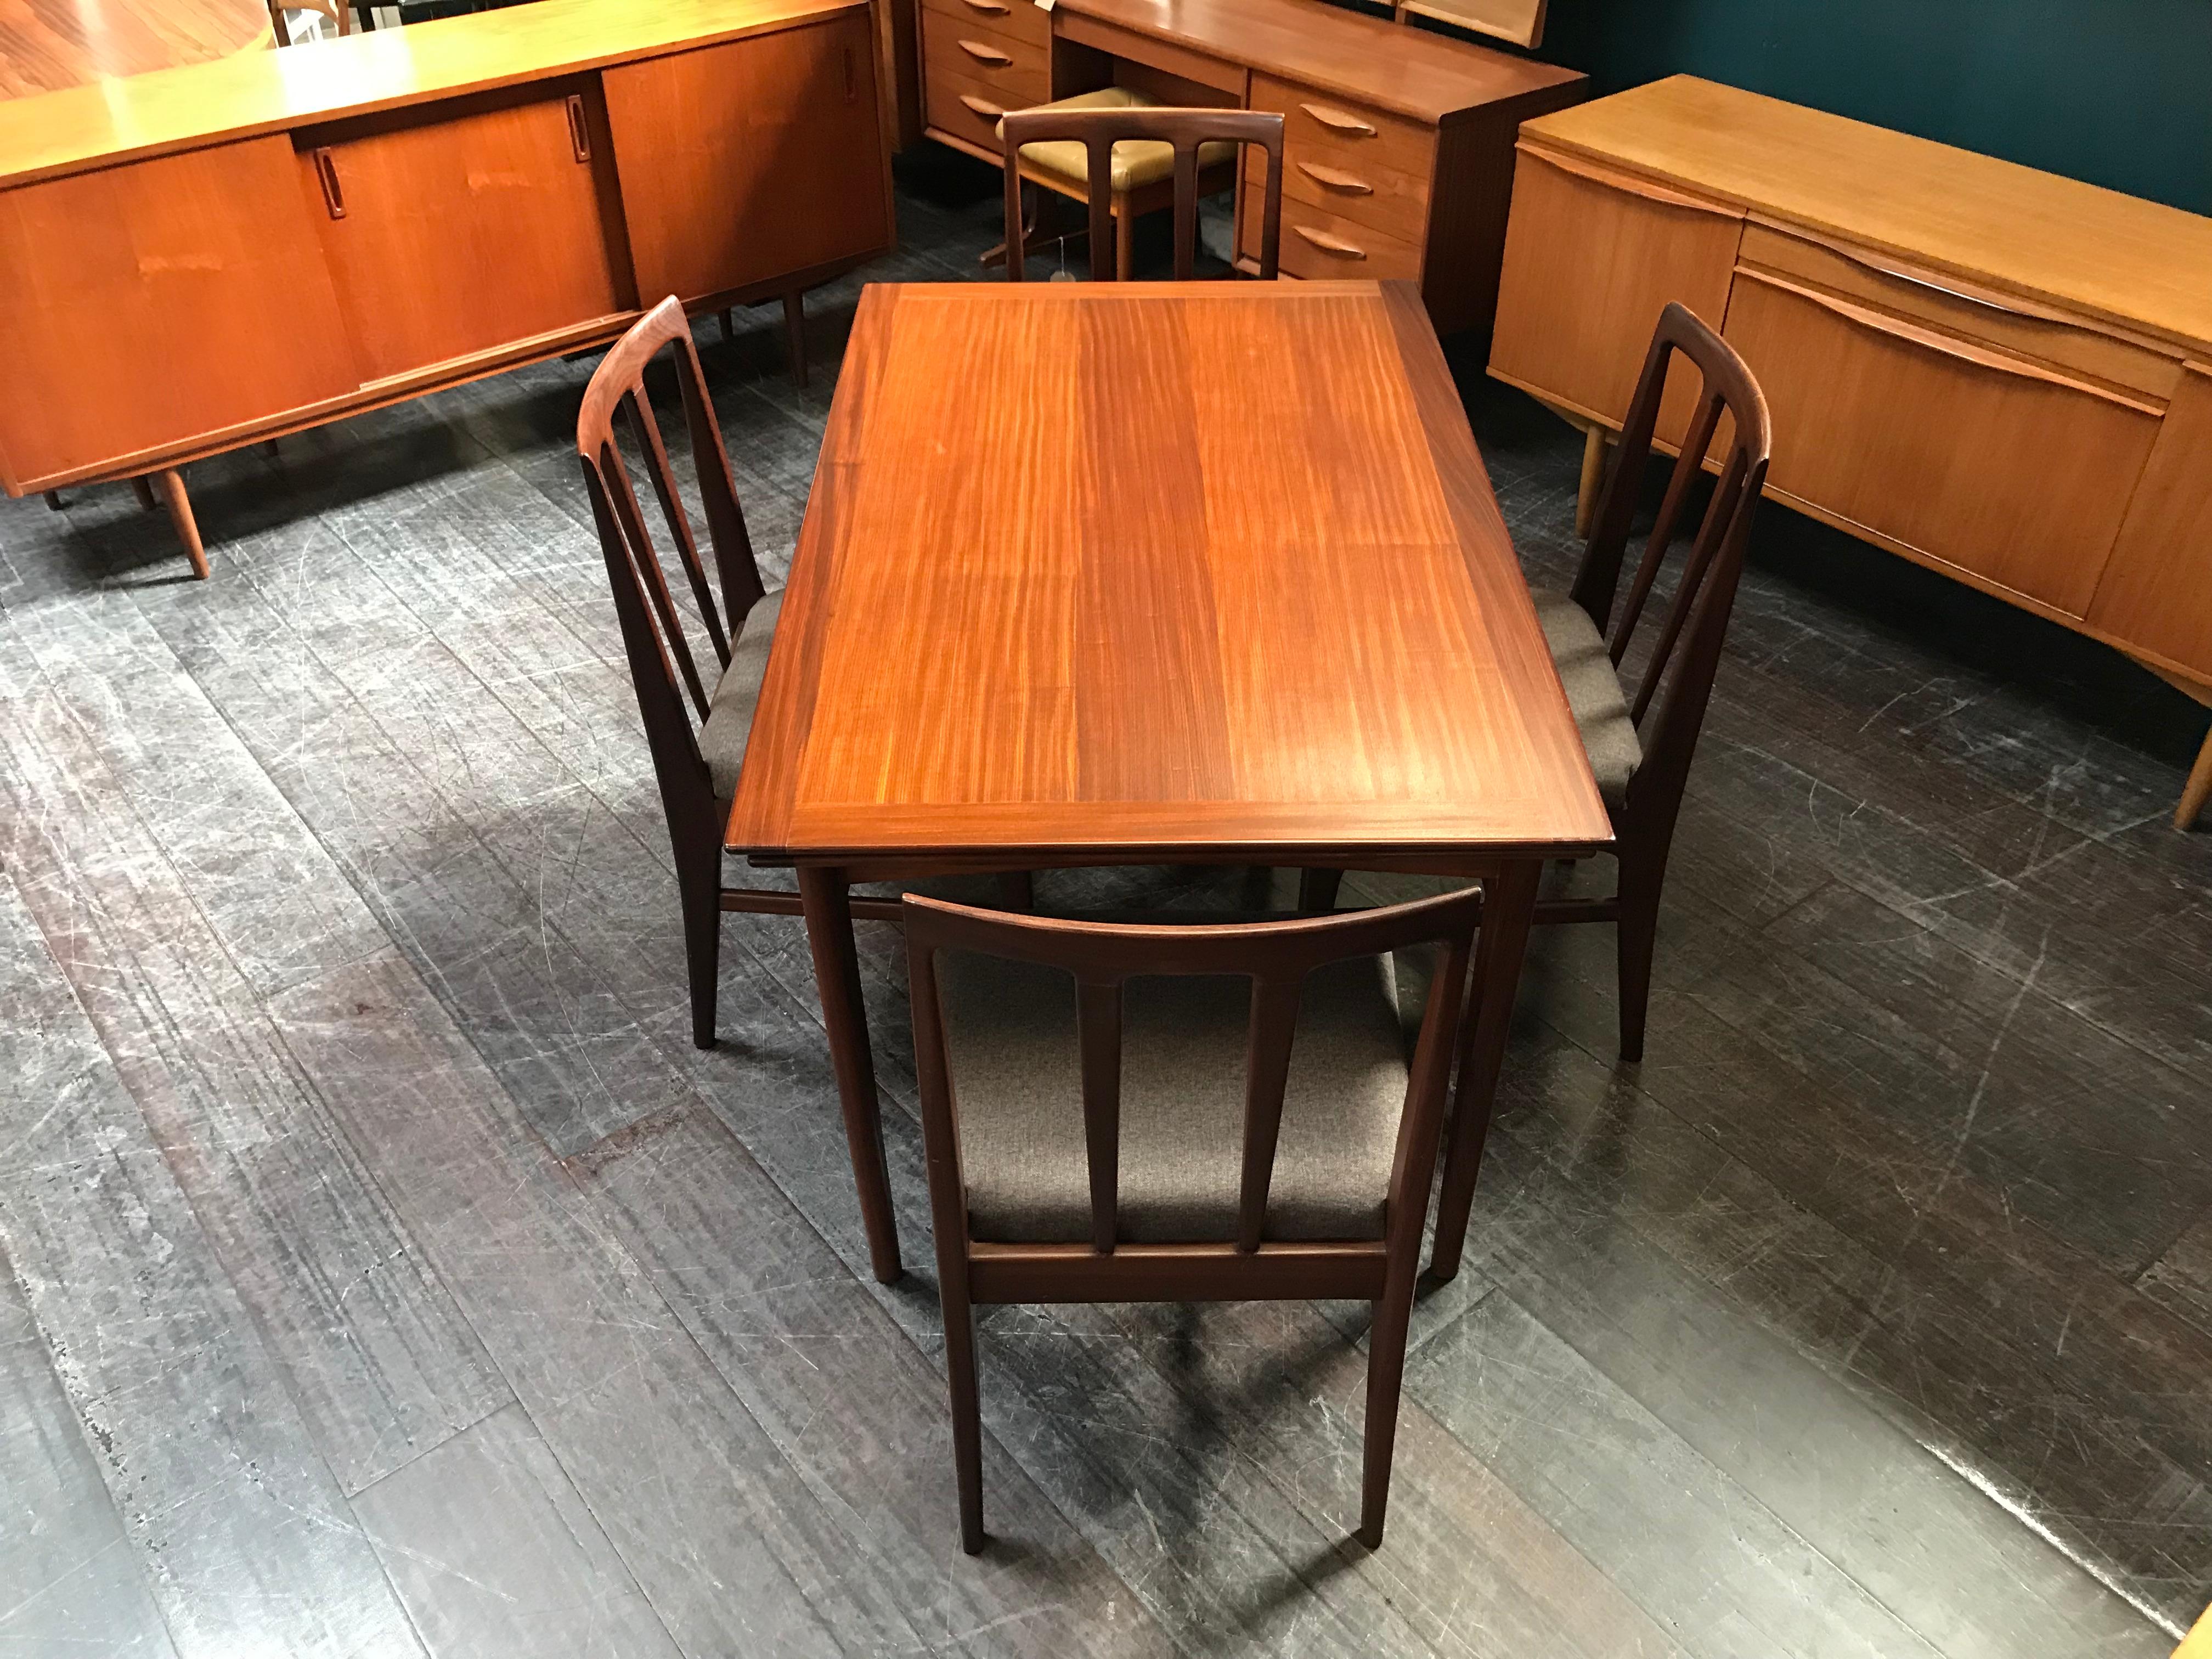 20th Century Extending Midcentury Afrormosia Dining Table with 4 Chairs by Younger of Glasgow For Sale